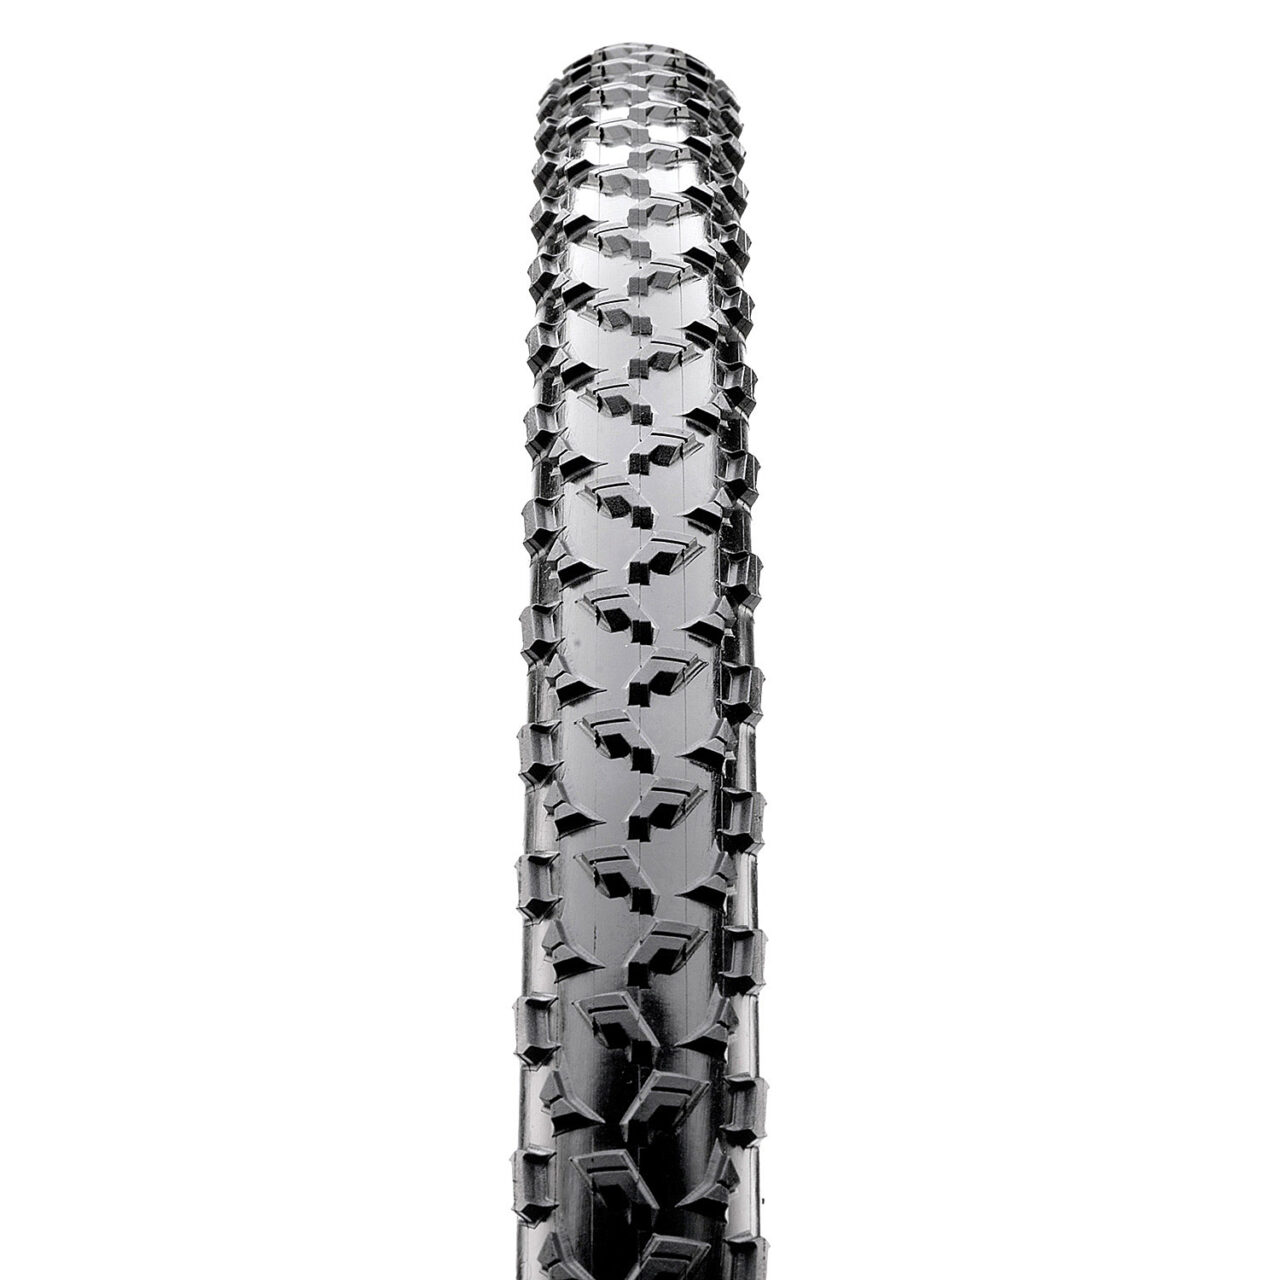 Maxxis Mud Wrestler bicycle tire tread